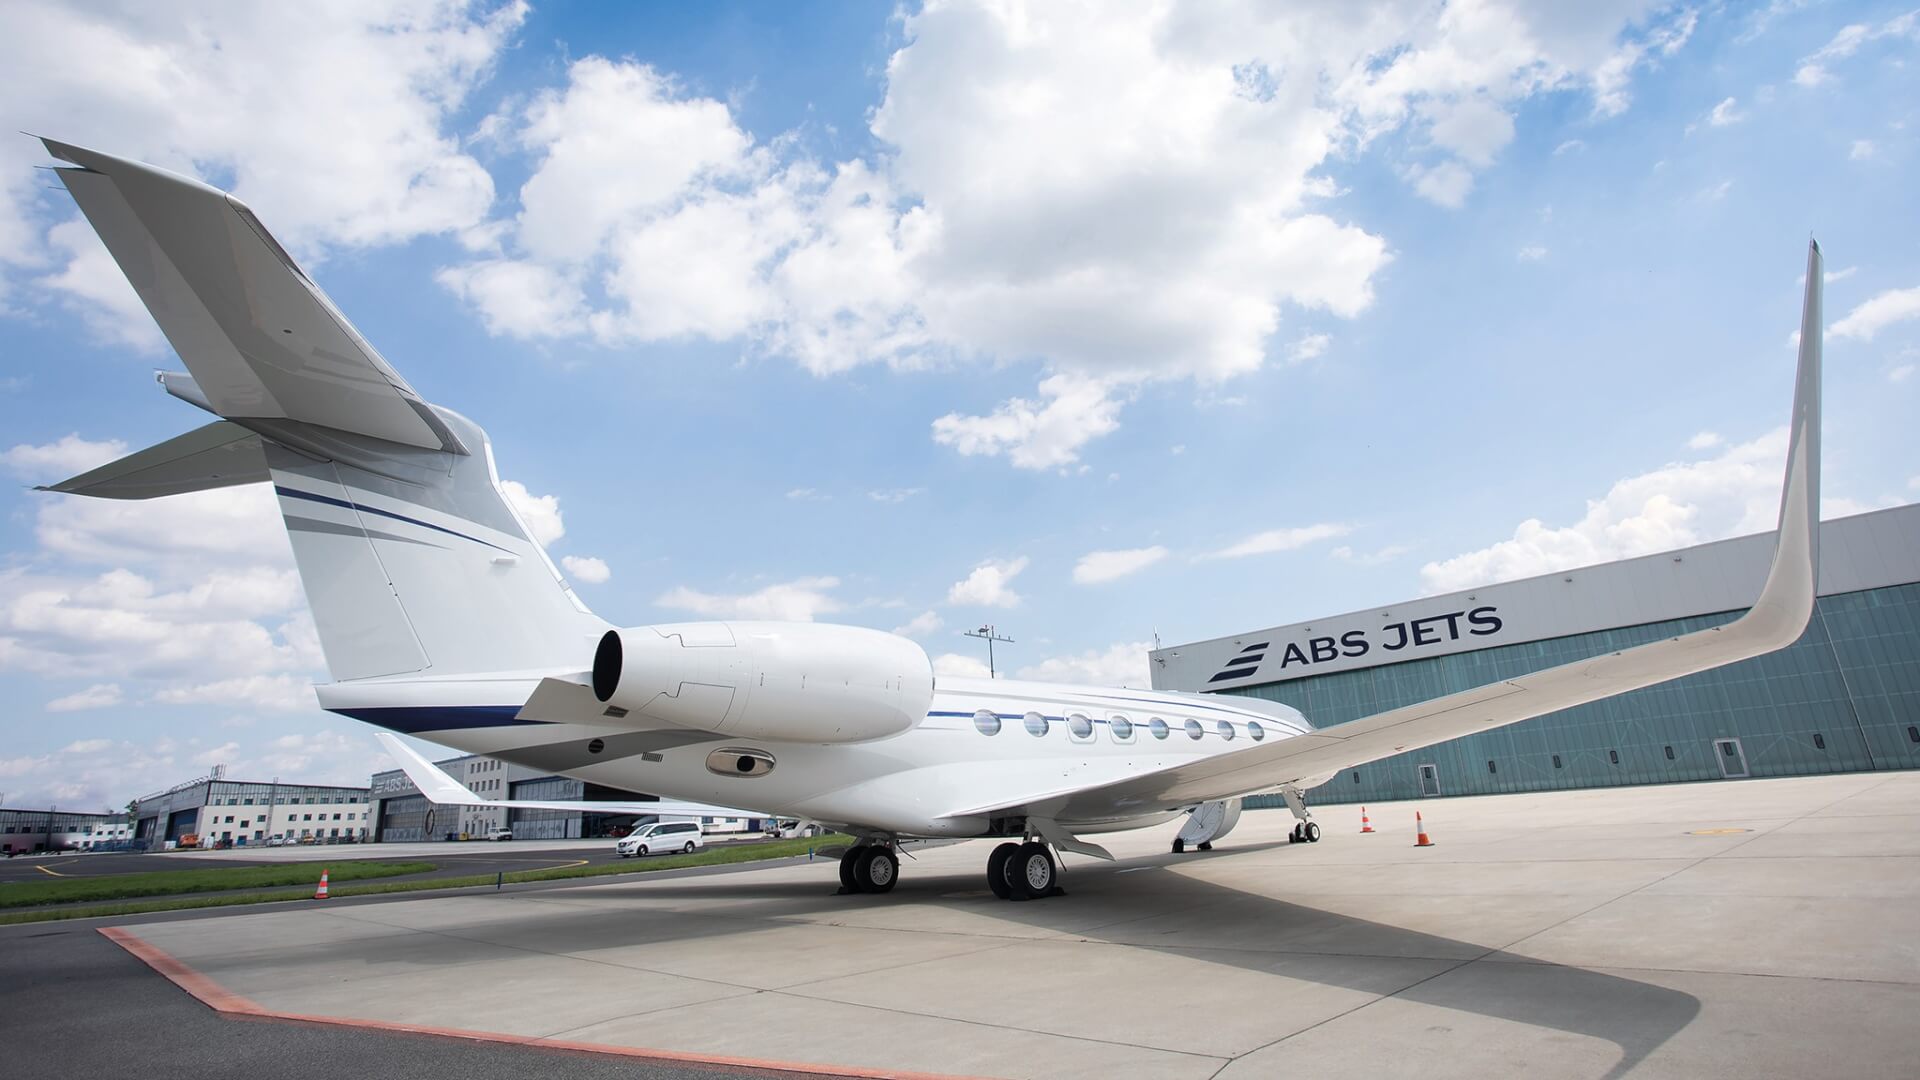 ABS Jets is expanding its fleet again